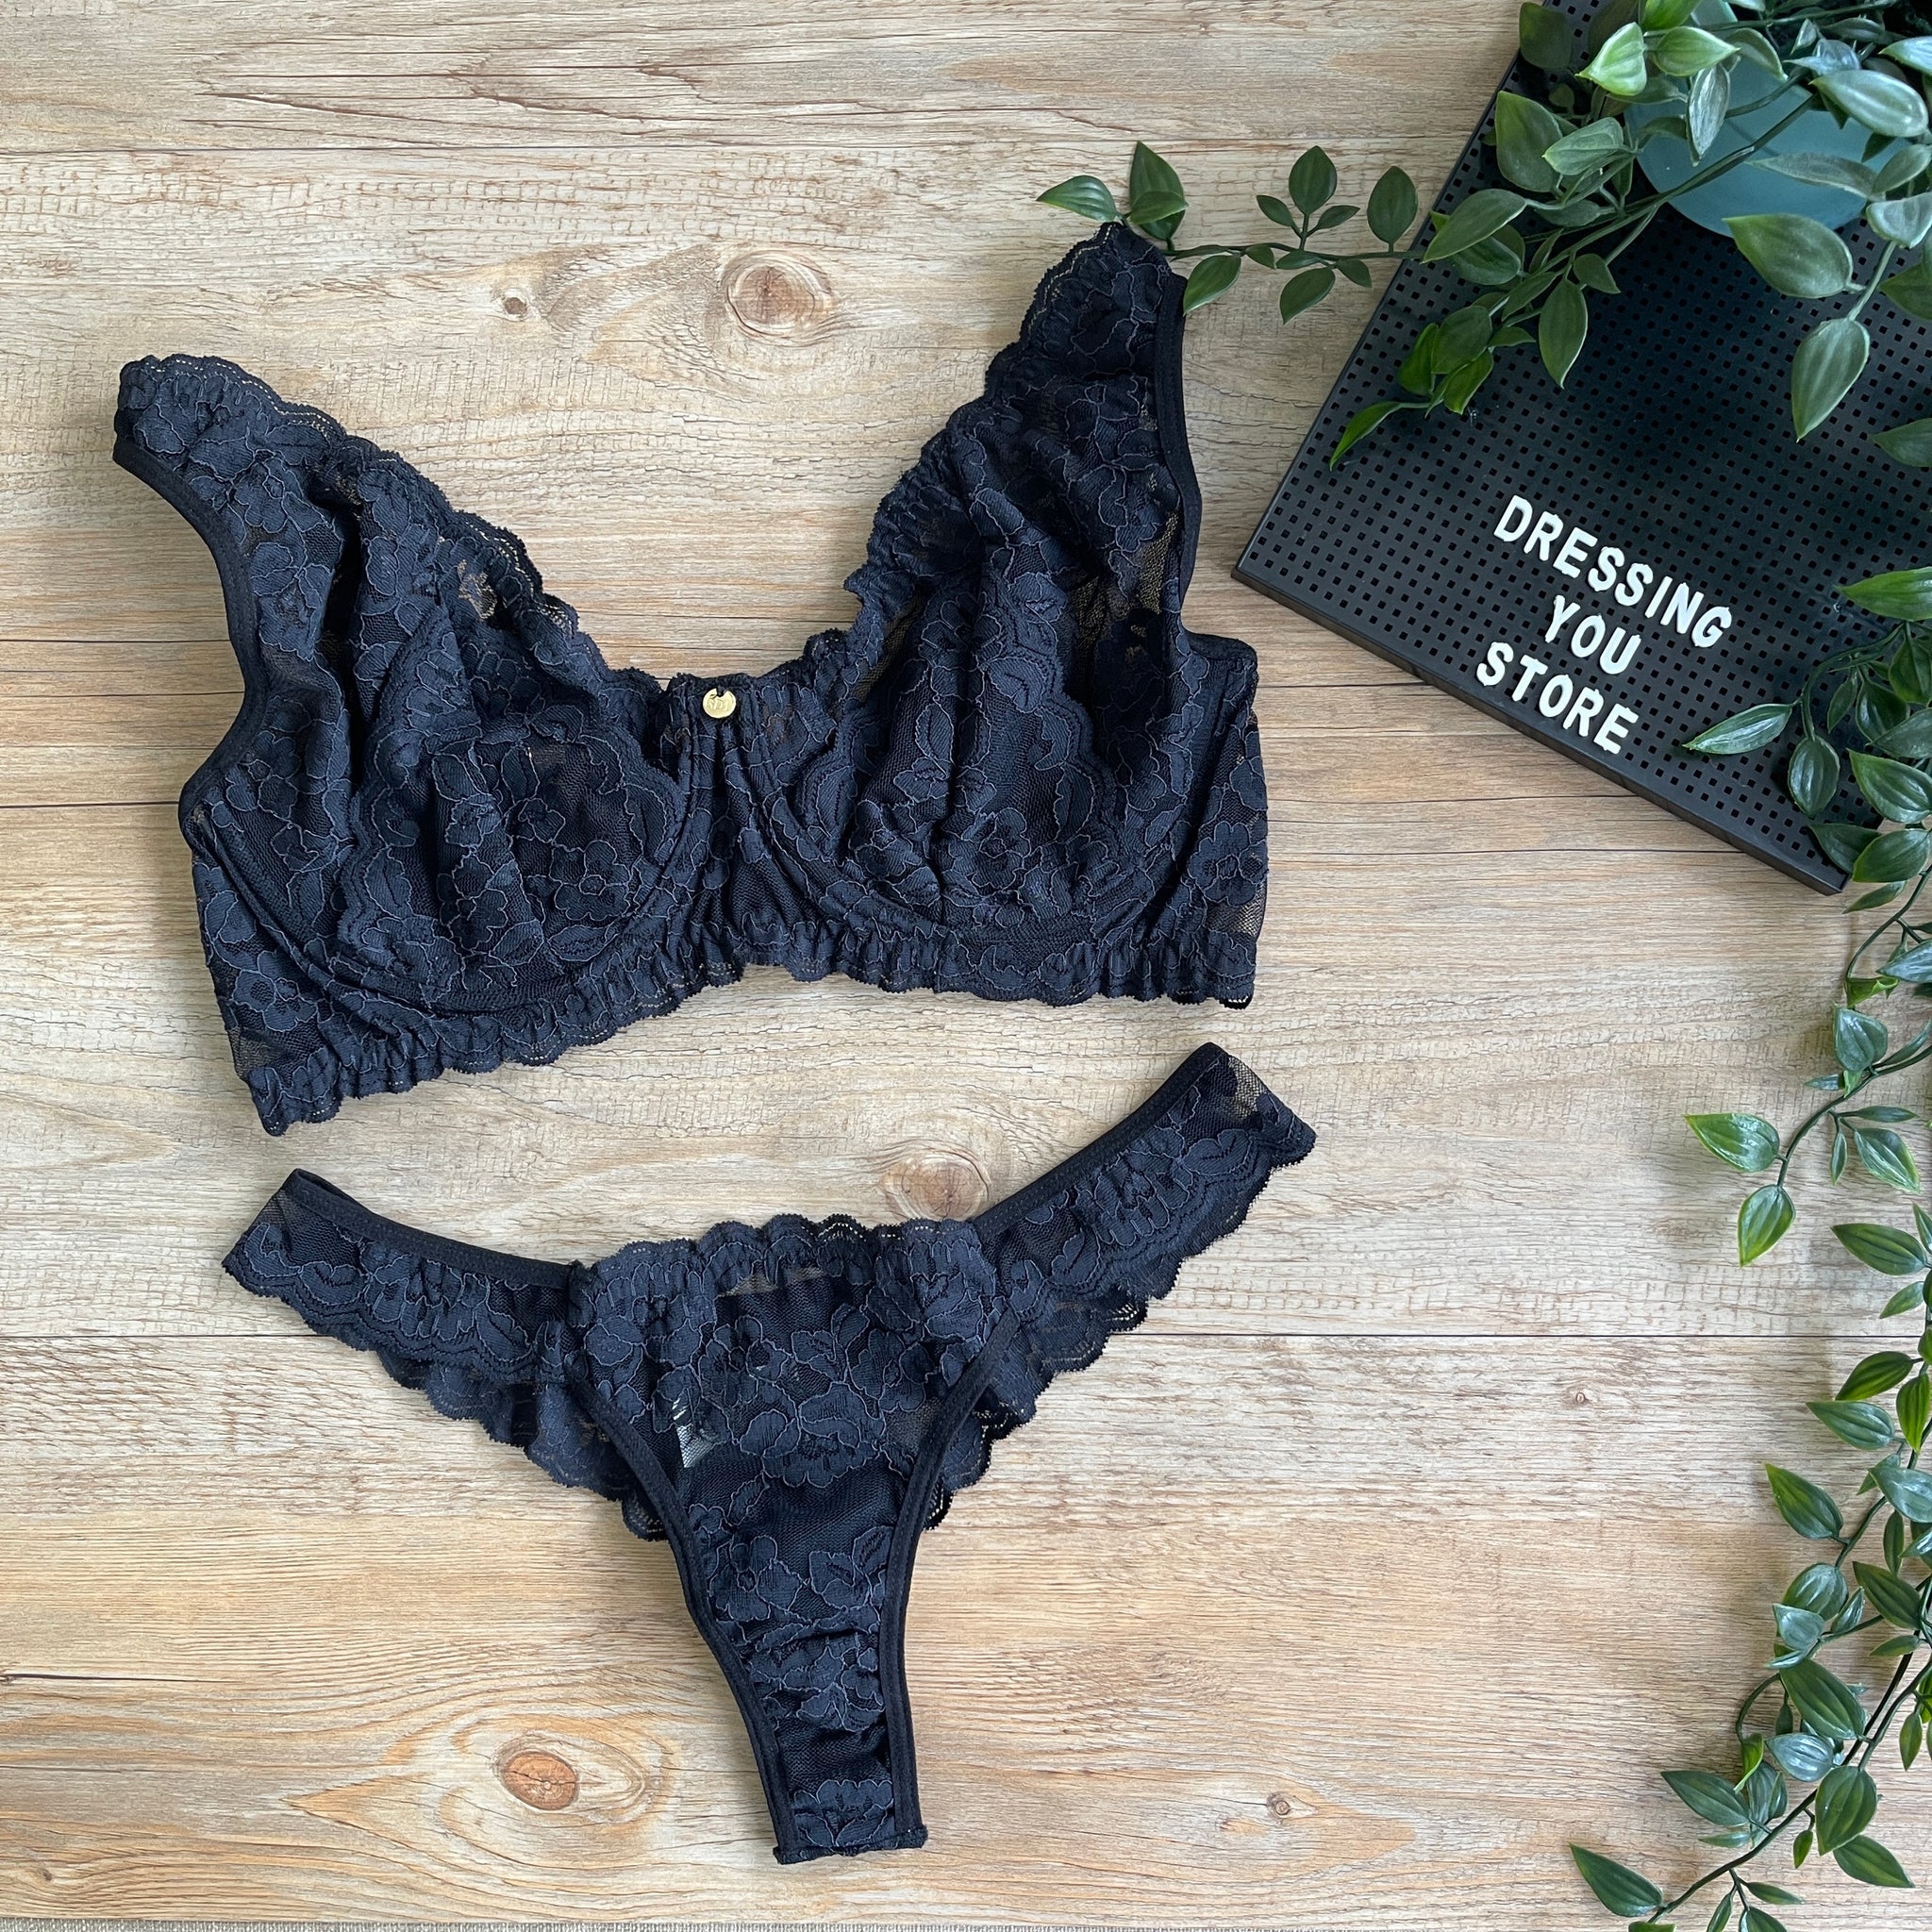 NICK UNLINED LACE SET - BLACK – DRESSING YOU STORE